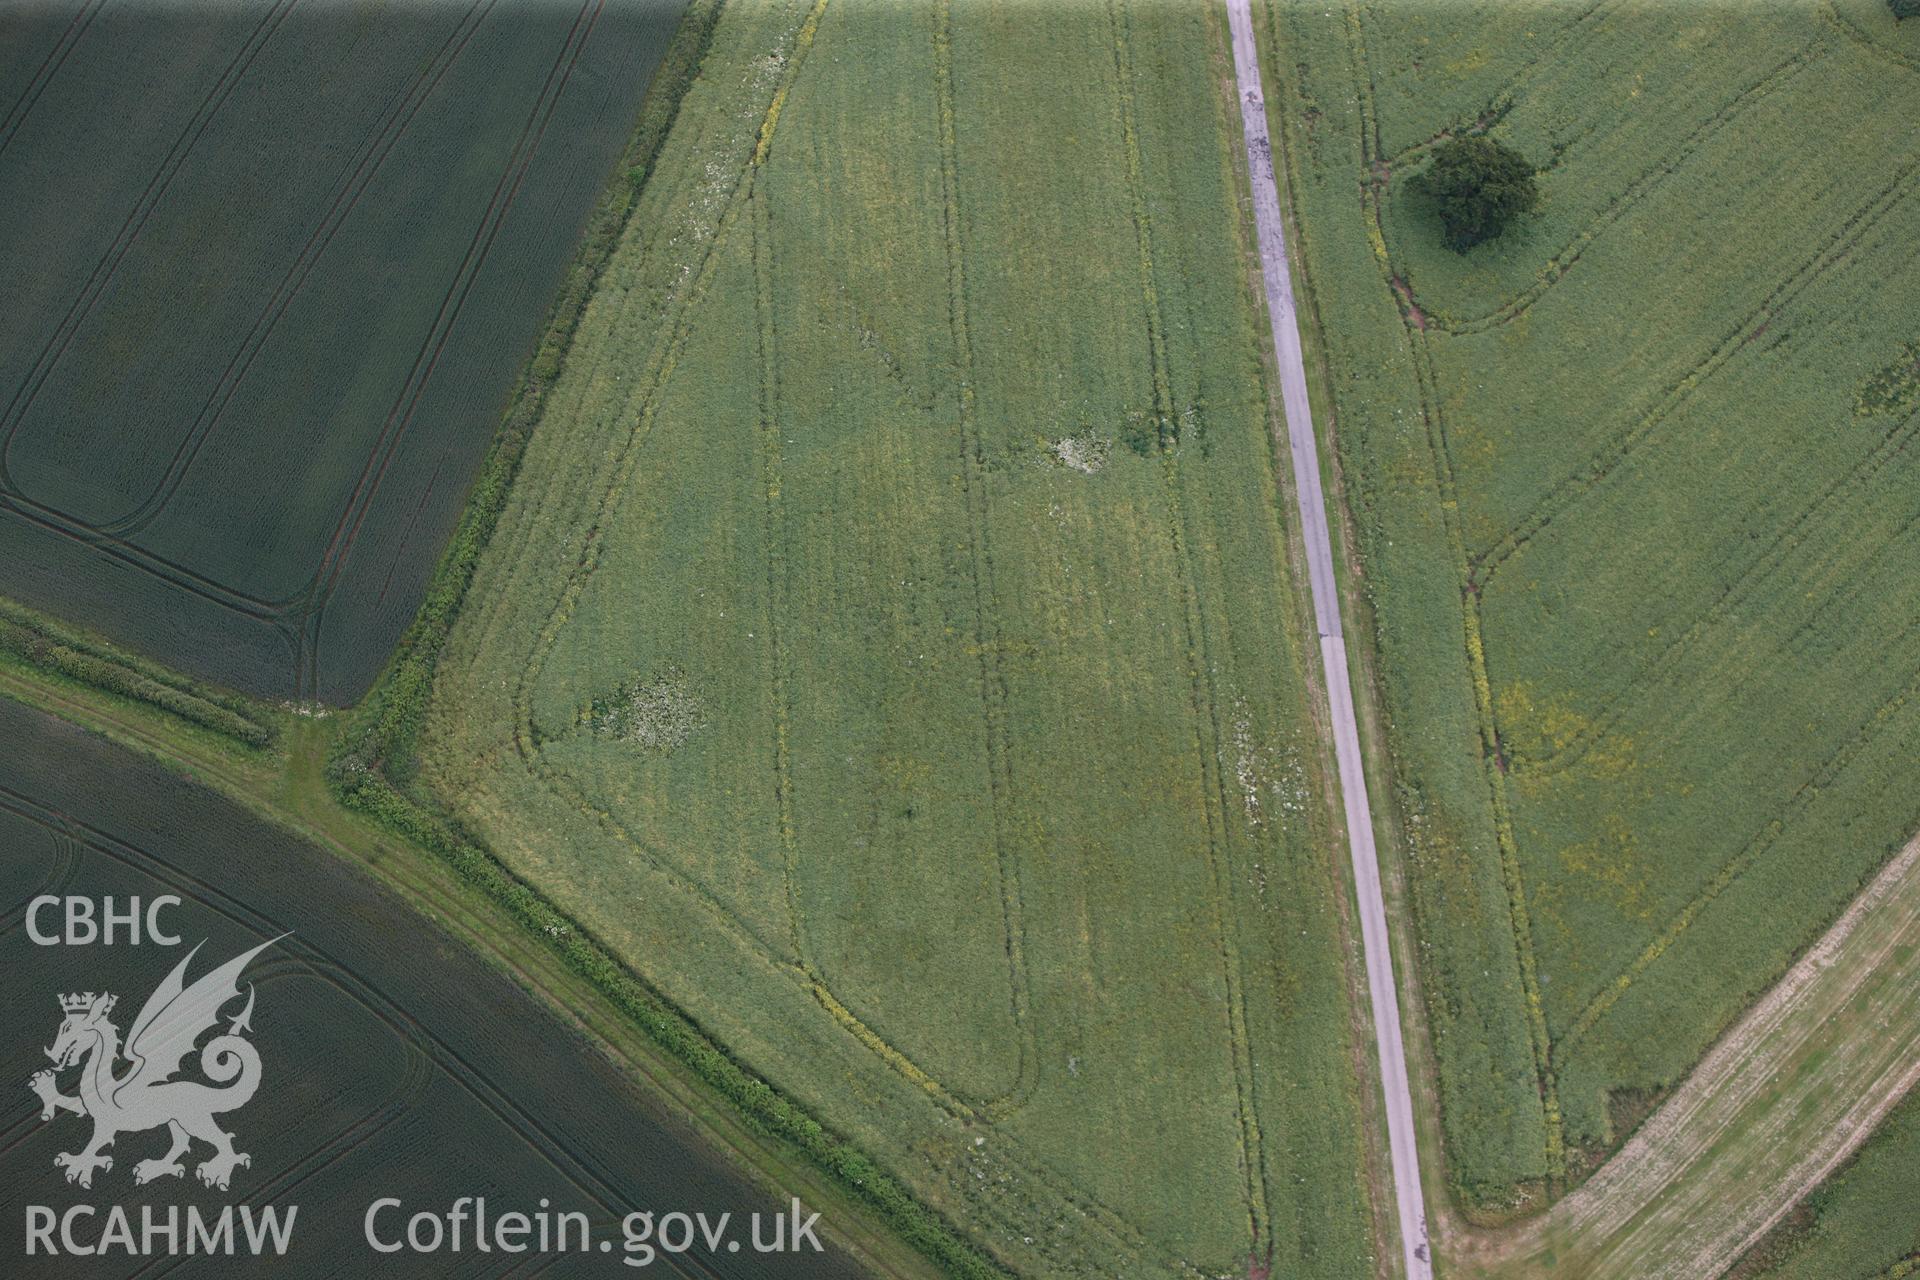 RCAHMW colour oblique photograph of Croes Carn Einion Roman villa. Taken by Toby Driver on 13/06/2011.